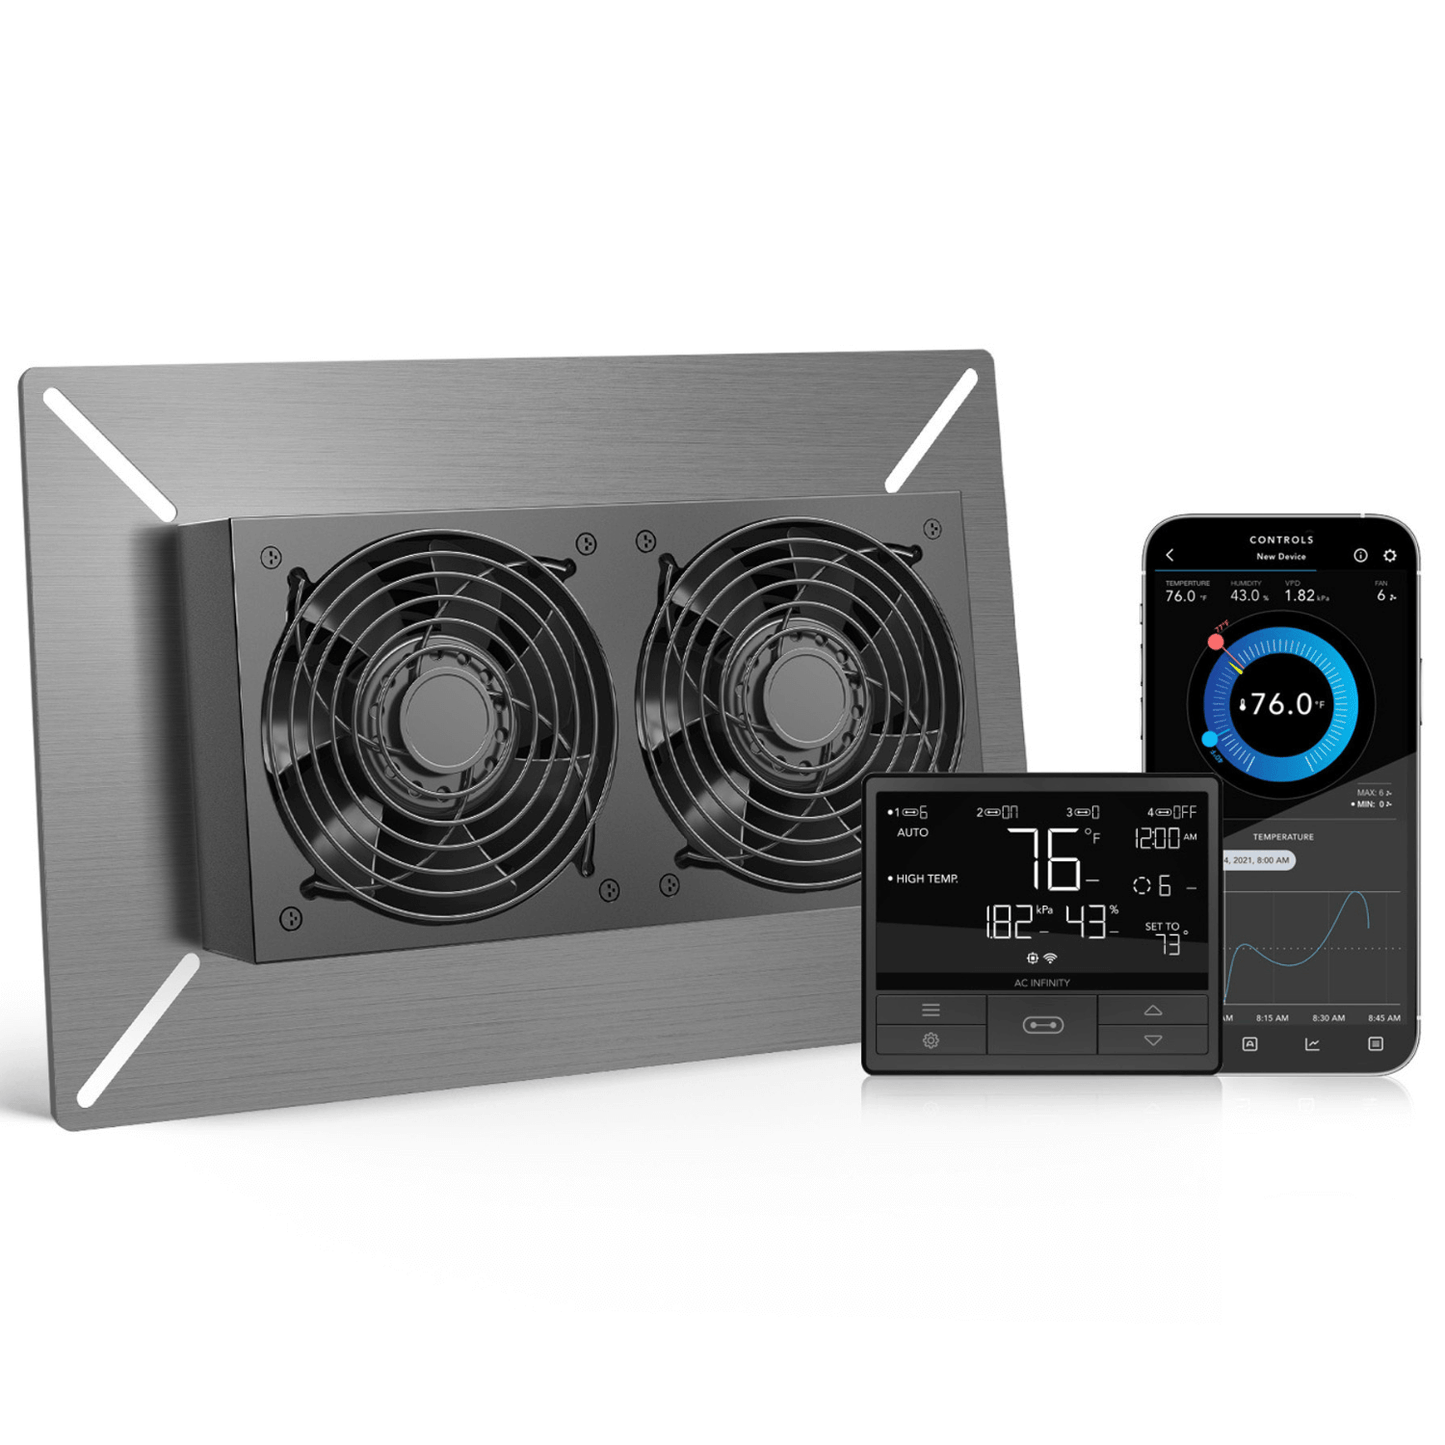 AC Infinity AIRTITAN T7, Crawlspace and Basement Ventilation Fan 12", WiFi-Integrated Controls, IP-55 Rated AC-ATT7 Climate Control